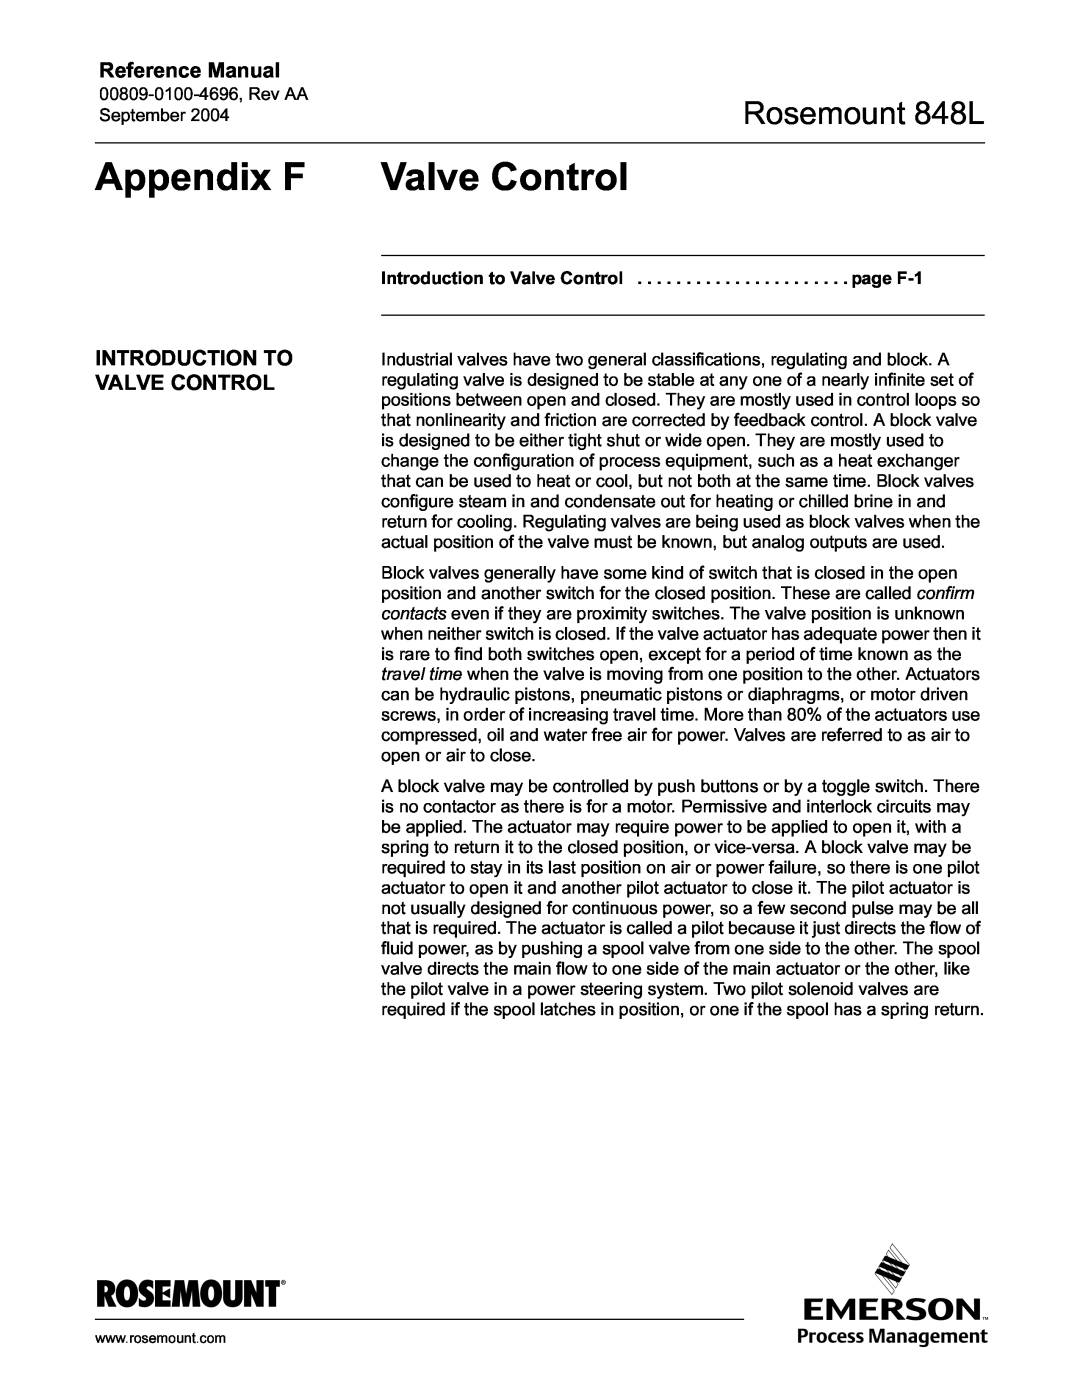 Emerson manual Appendix F, Introduction To Valve Control, Rosemount 848L, Reference Manual 